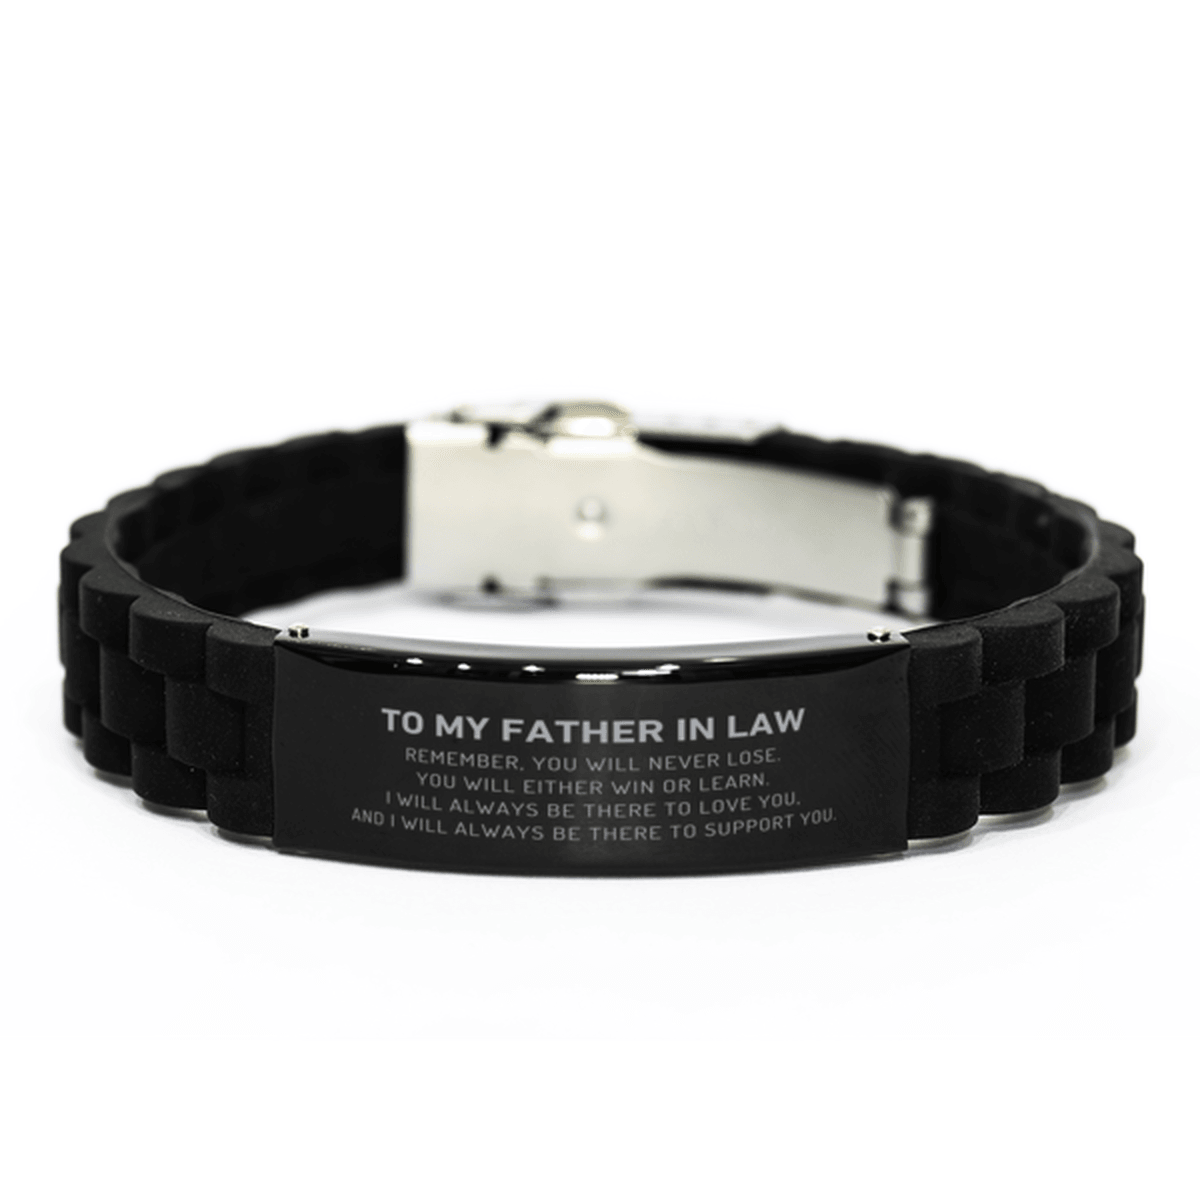 Father In Law Gifts, To My Father In Law Remember, you will never lose. You will either WIN or LEARN, Keepsake Black Glidelock Clasp Bracelet For Father In Law Engraved, Birthday Christmas Gifts Ideas For Father In Law X-mas Gifts